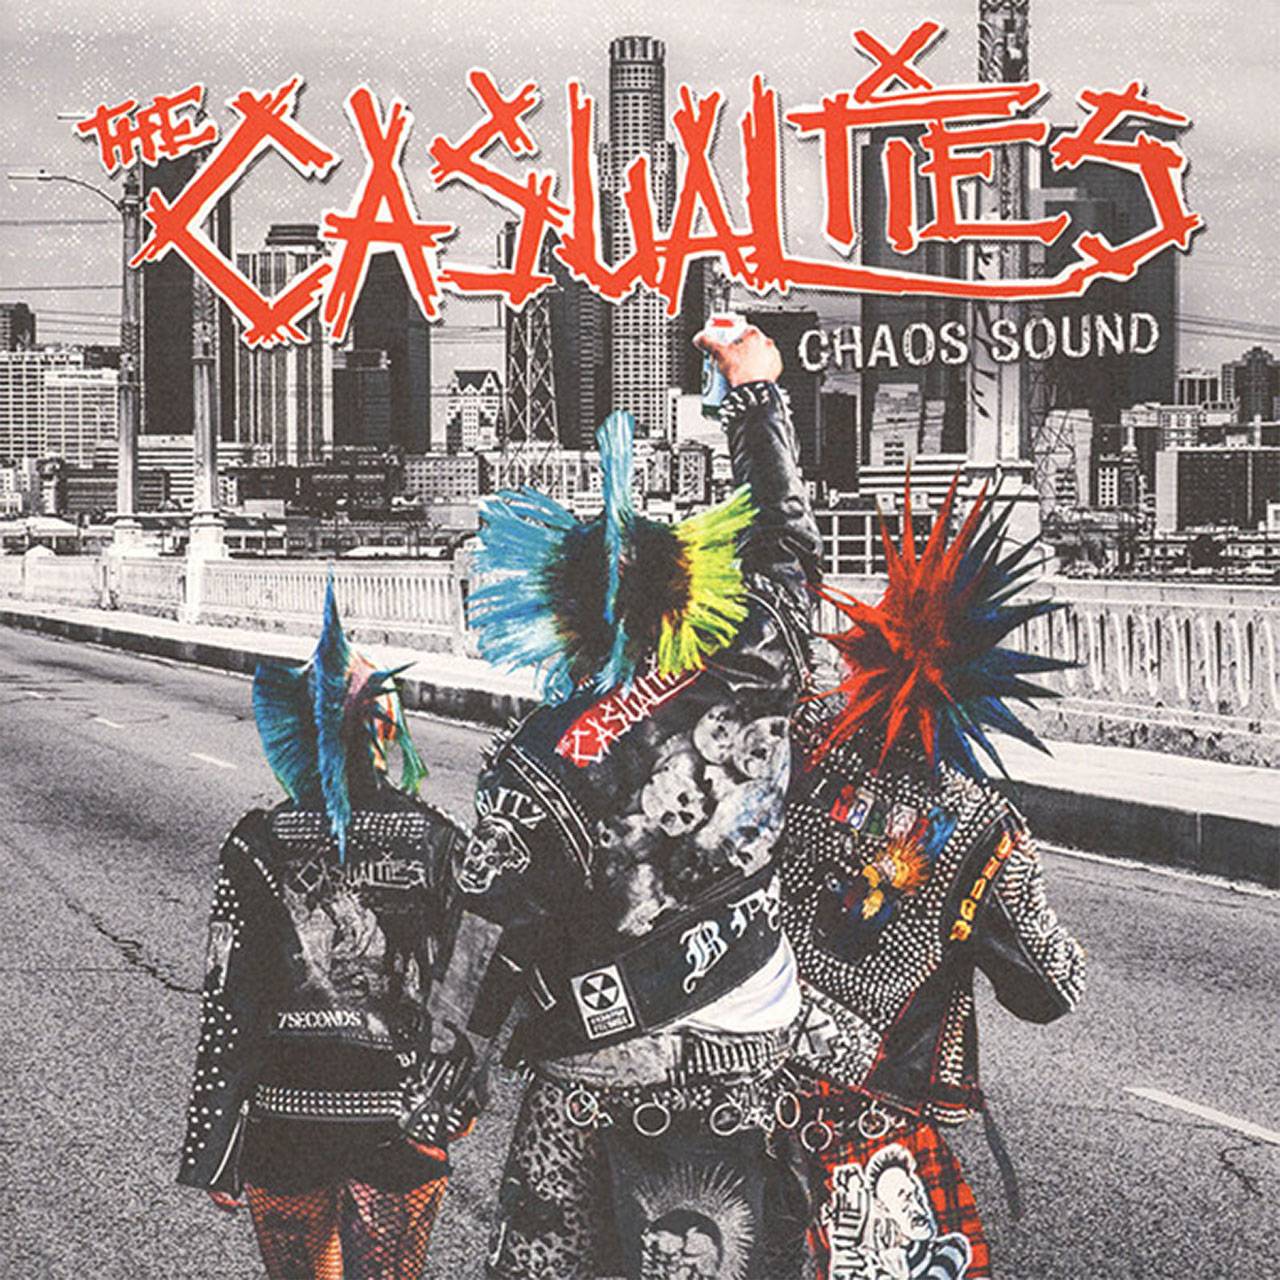 The Casualties - Chaos Sound (Ltd. Ed. of 950)